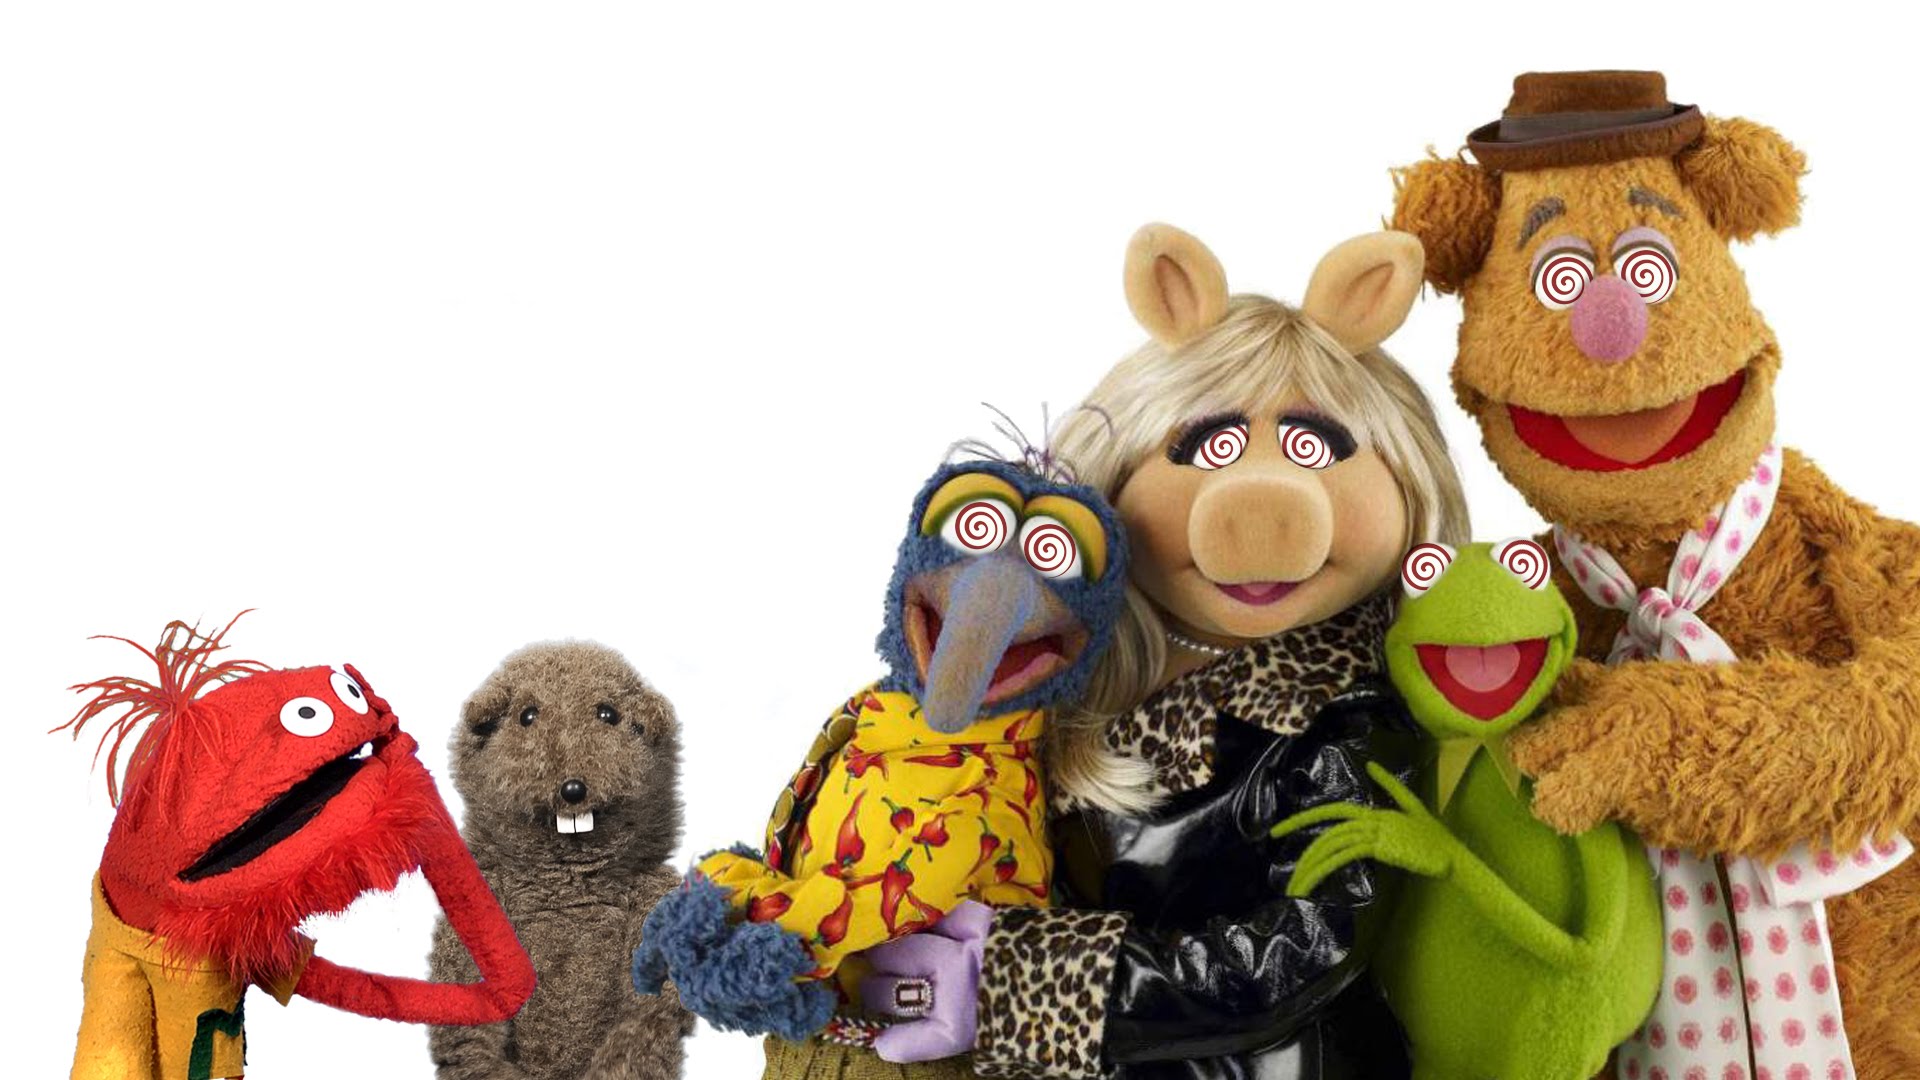 The Muppets #3